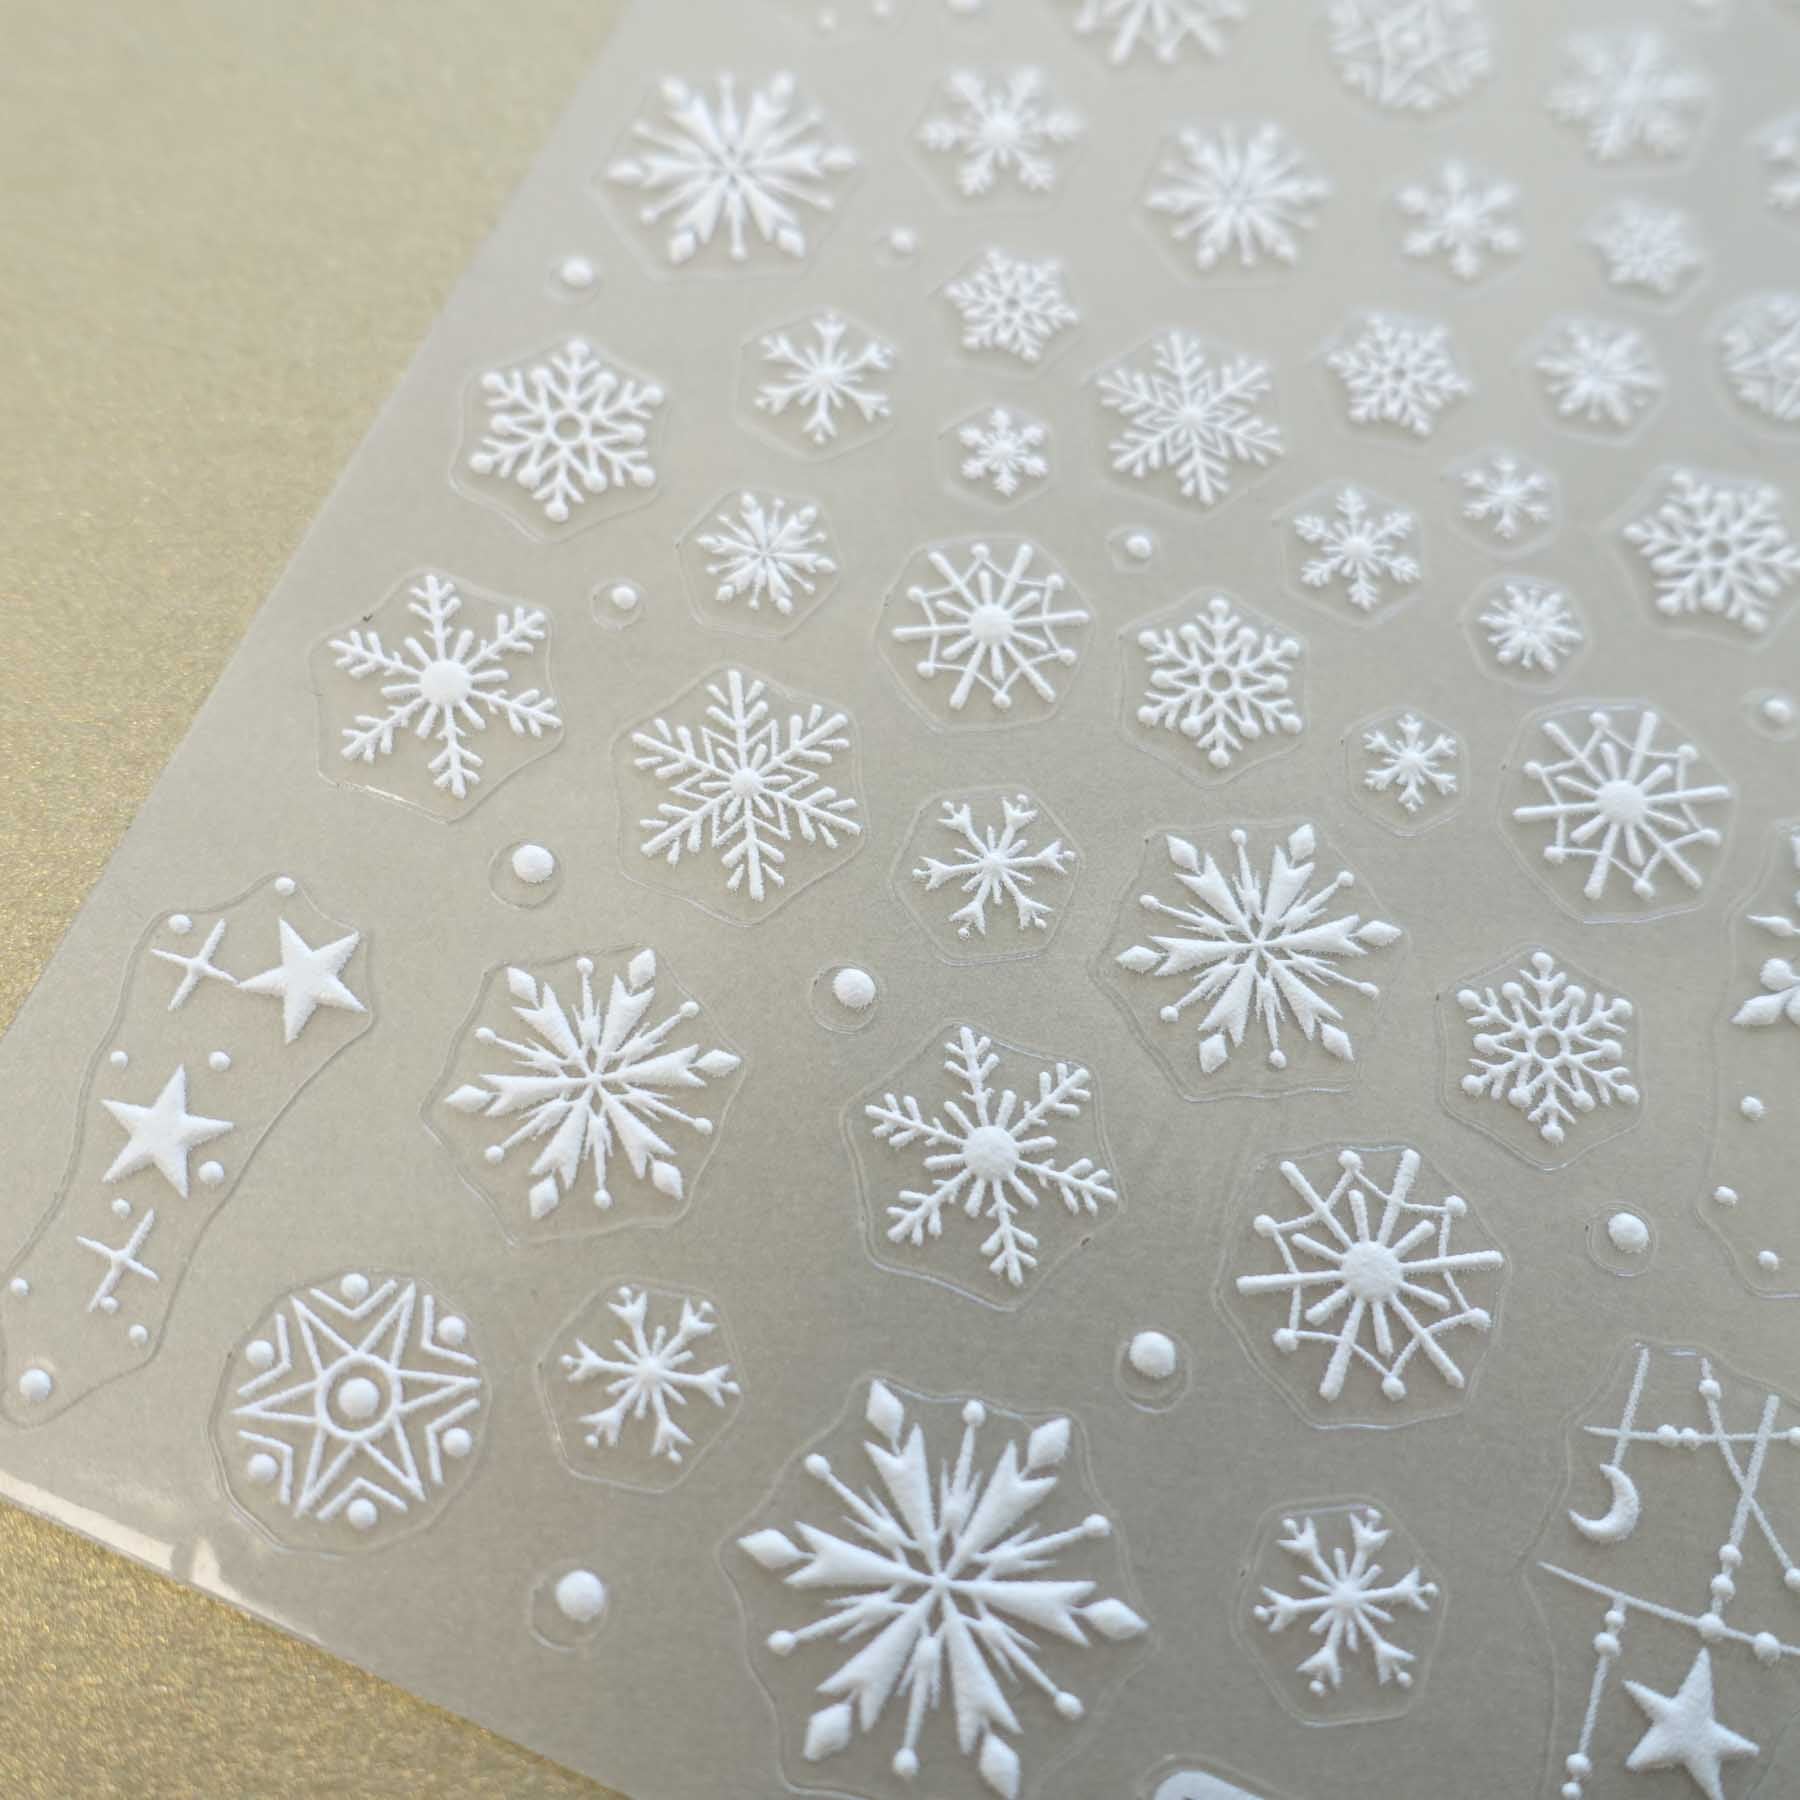 Snowflake 3D Clear-Backed Decorative Stickers Sheet